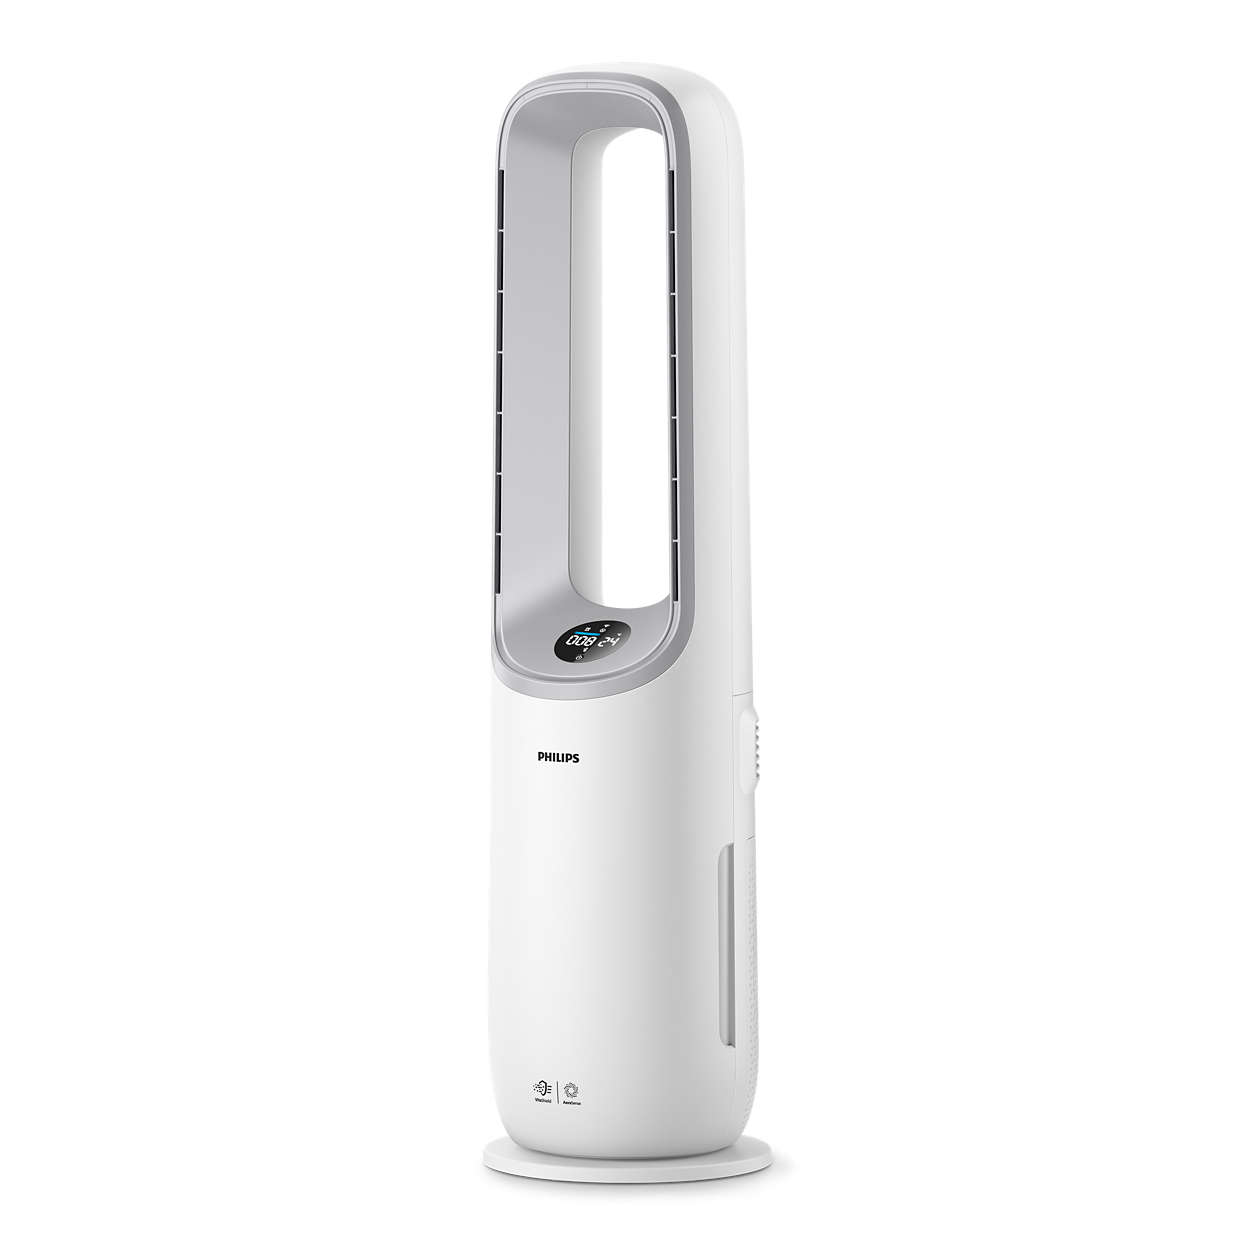 Our smartest 2-in-1 Air Purifier